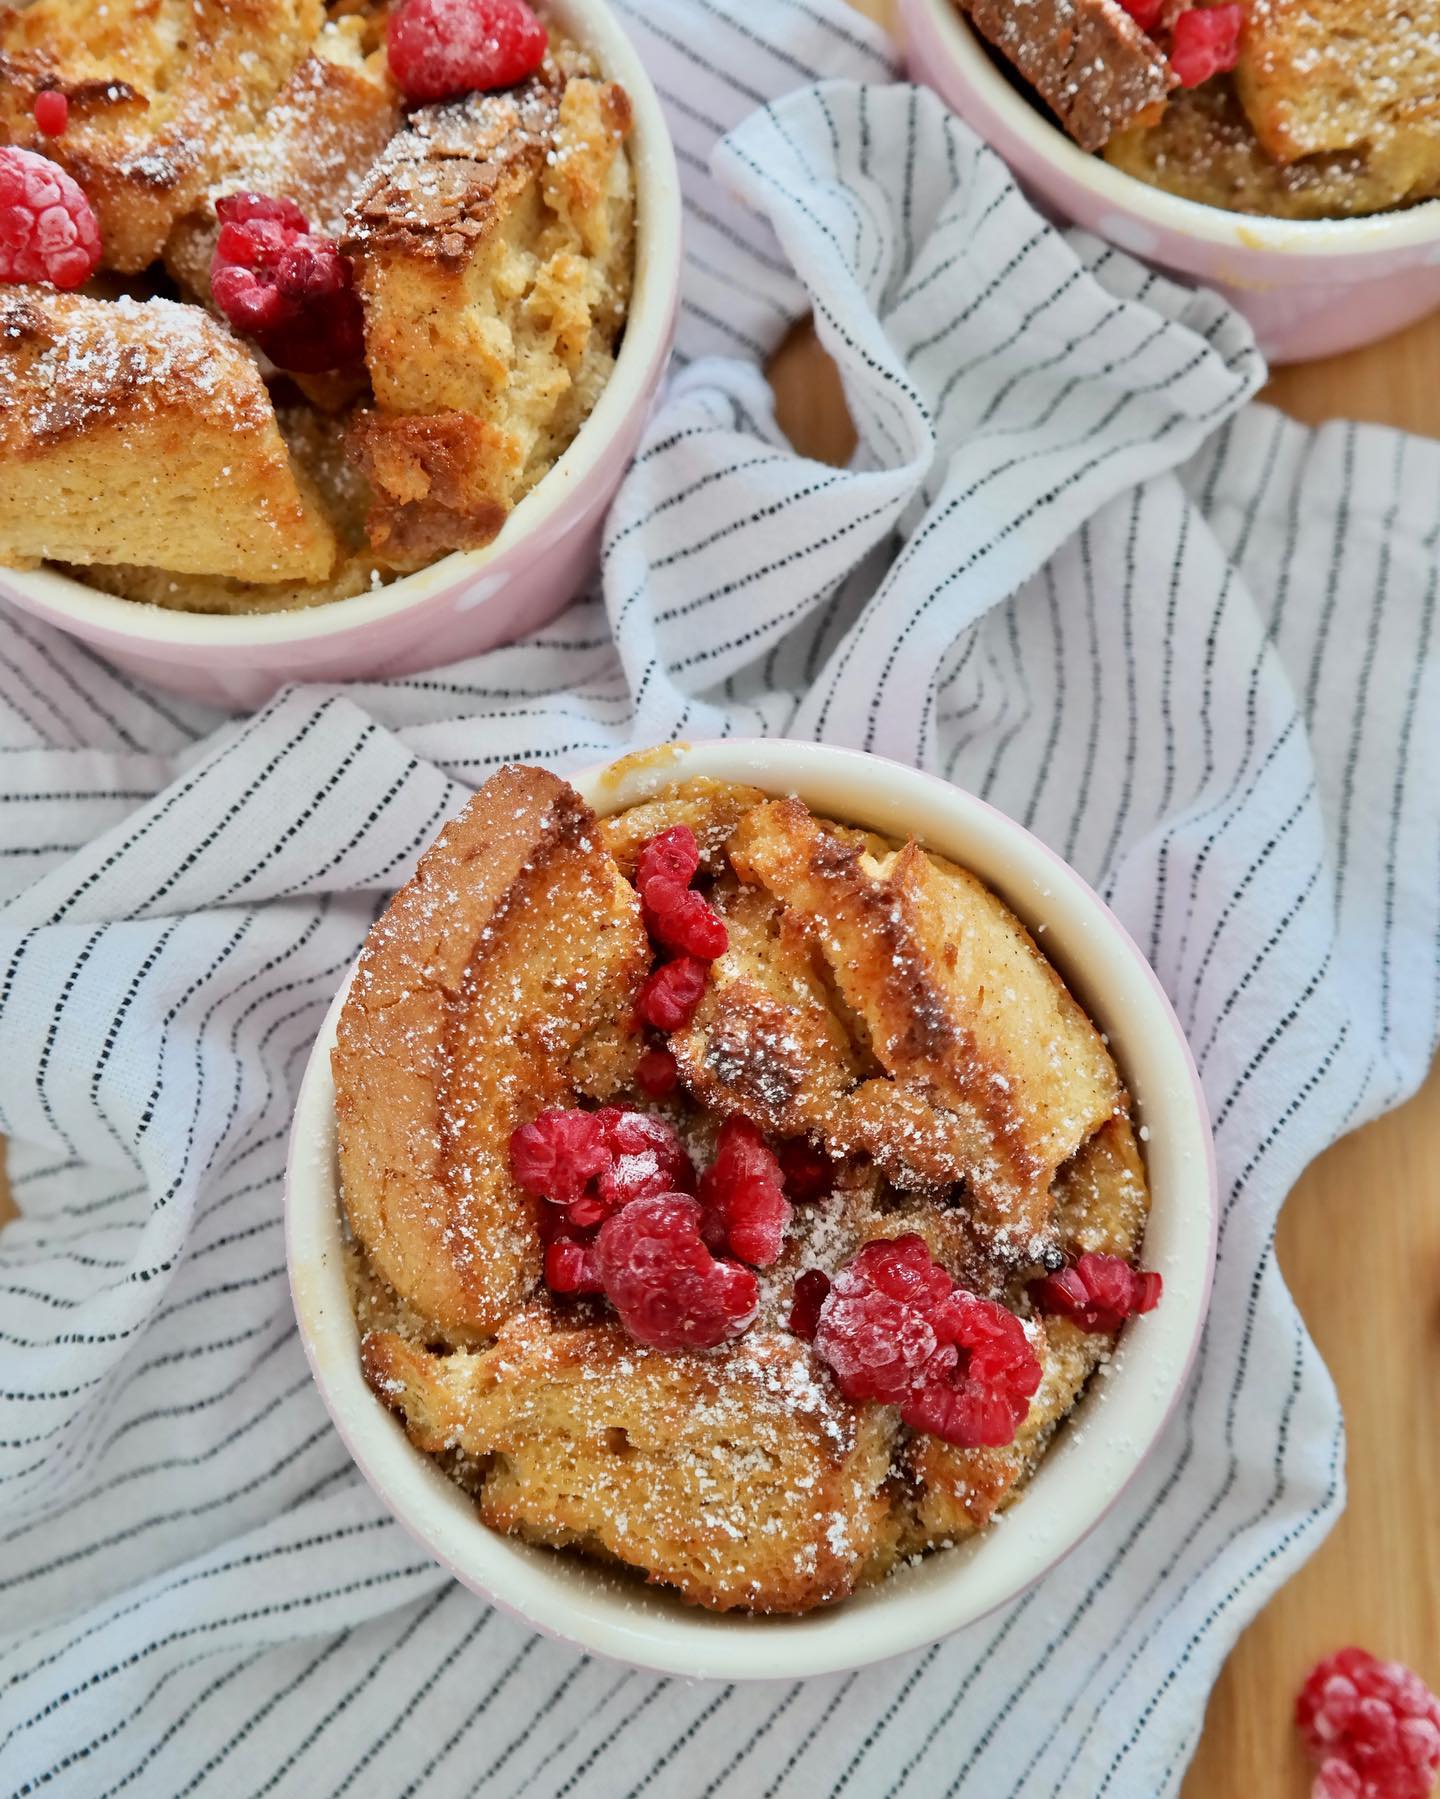 Bread pudding for breakfast today 🥰
.
.
.
.
#baking #bakinglove #homebake #homebaked #breadpudding #delicious #breakfast #breakfastideas #breakfasttime #sweetbreakfast #ilovebaking #dessert #pic #picoftheday #foodphotography #food #foodblogger #foodblog